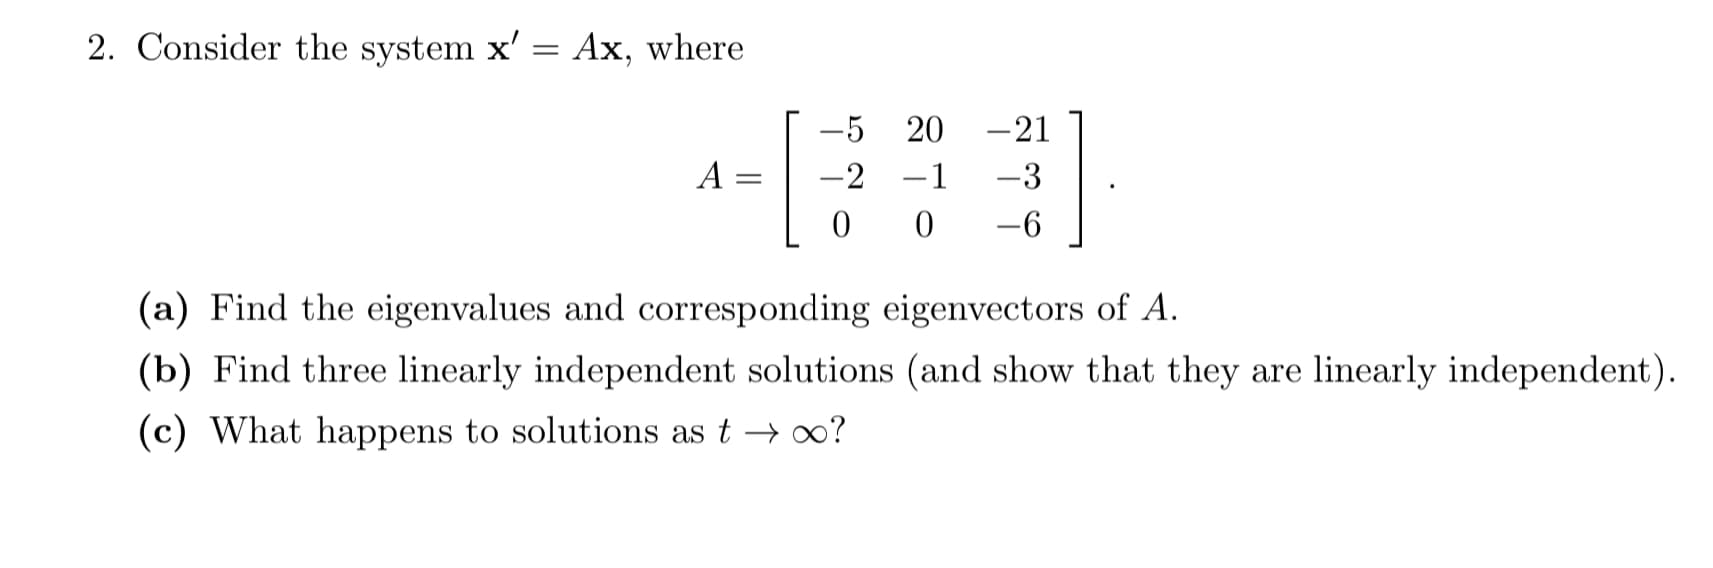 linearly independent solutions
